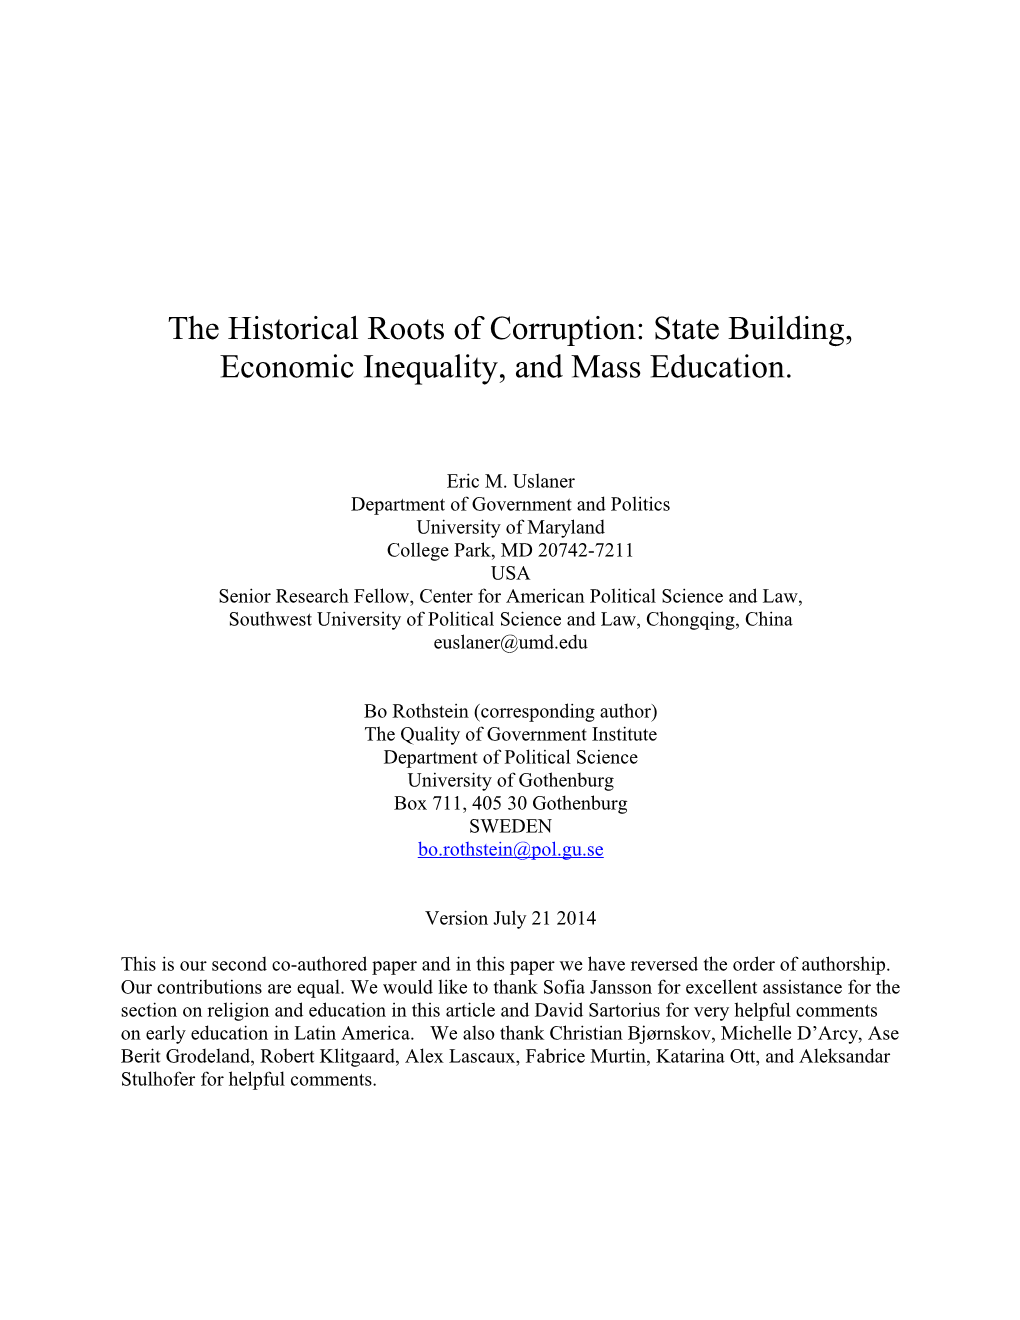 The Historical Roots of Corruption: State Building, Economic Inequality, and Mass Education